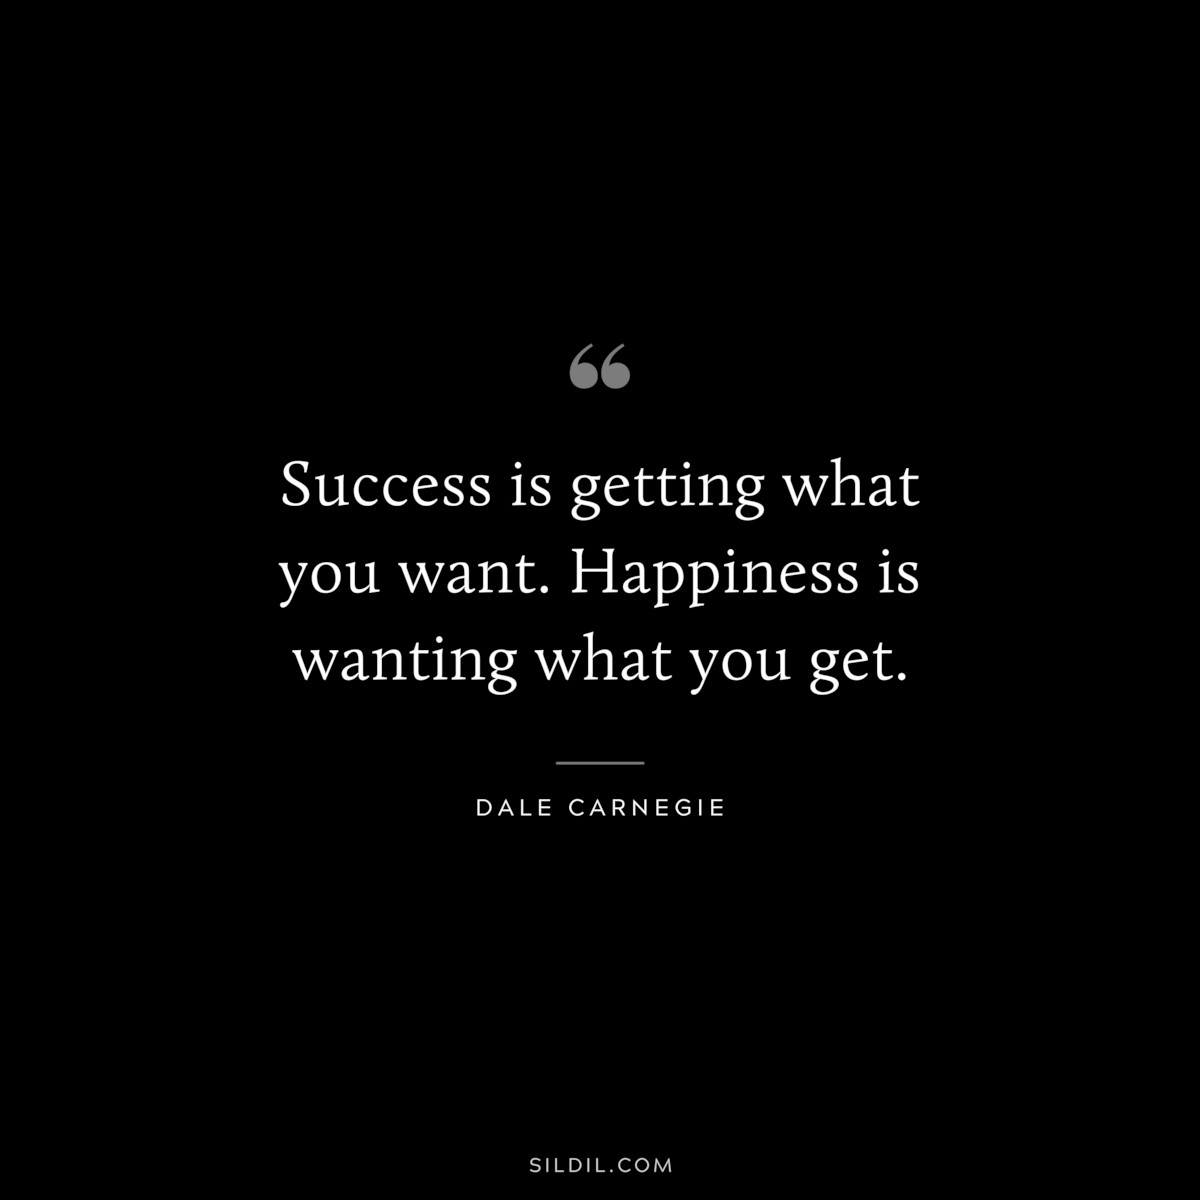 Success is getting what you want. Happiness is wanting what you get. ― Dale Carnegie